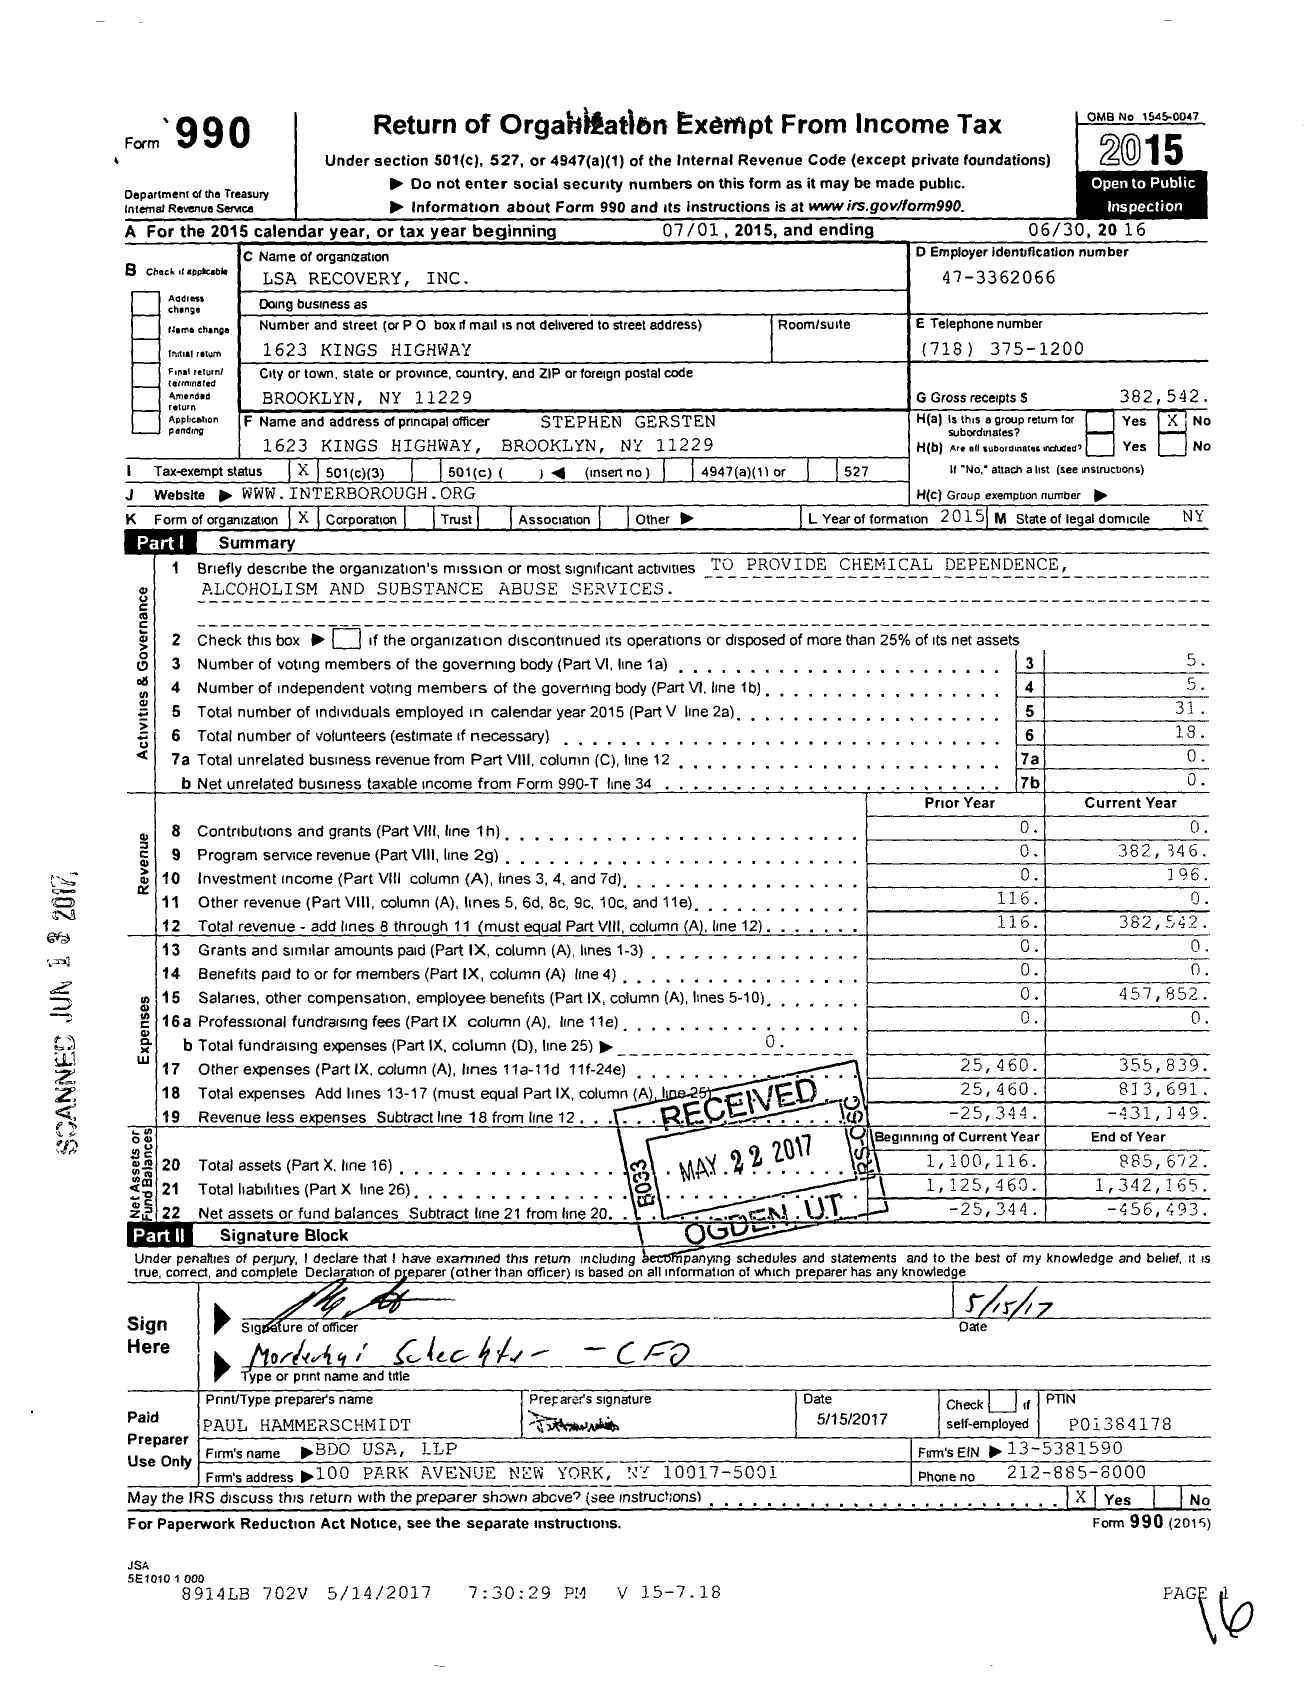 Image of first page of 2015 Form 990 for Lsa Recovery